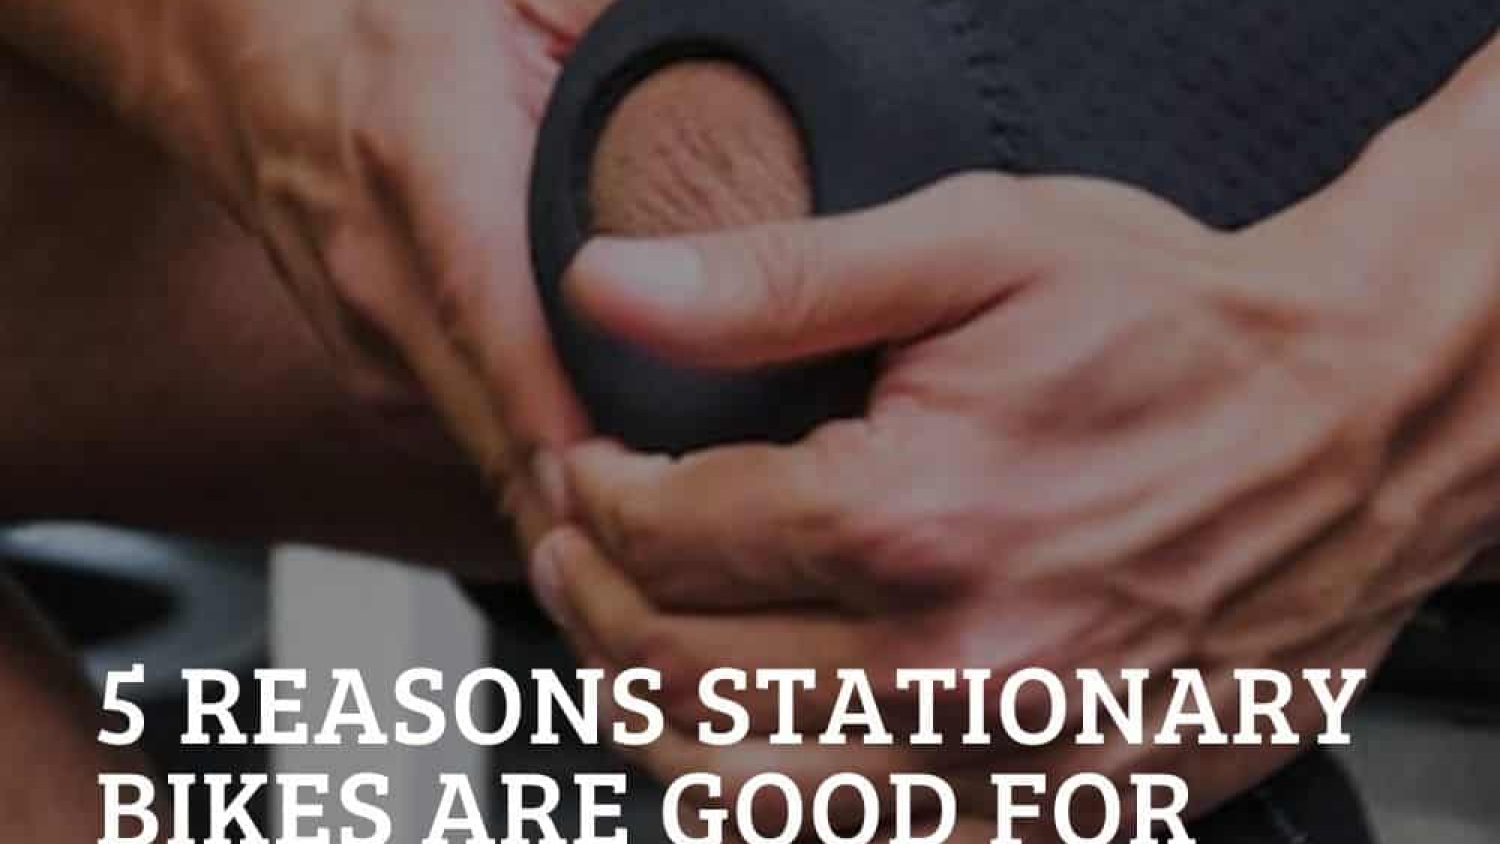 5 Reasons Why a Stationary Bike is Good for Bad Knees